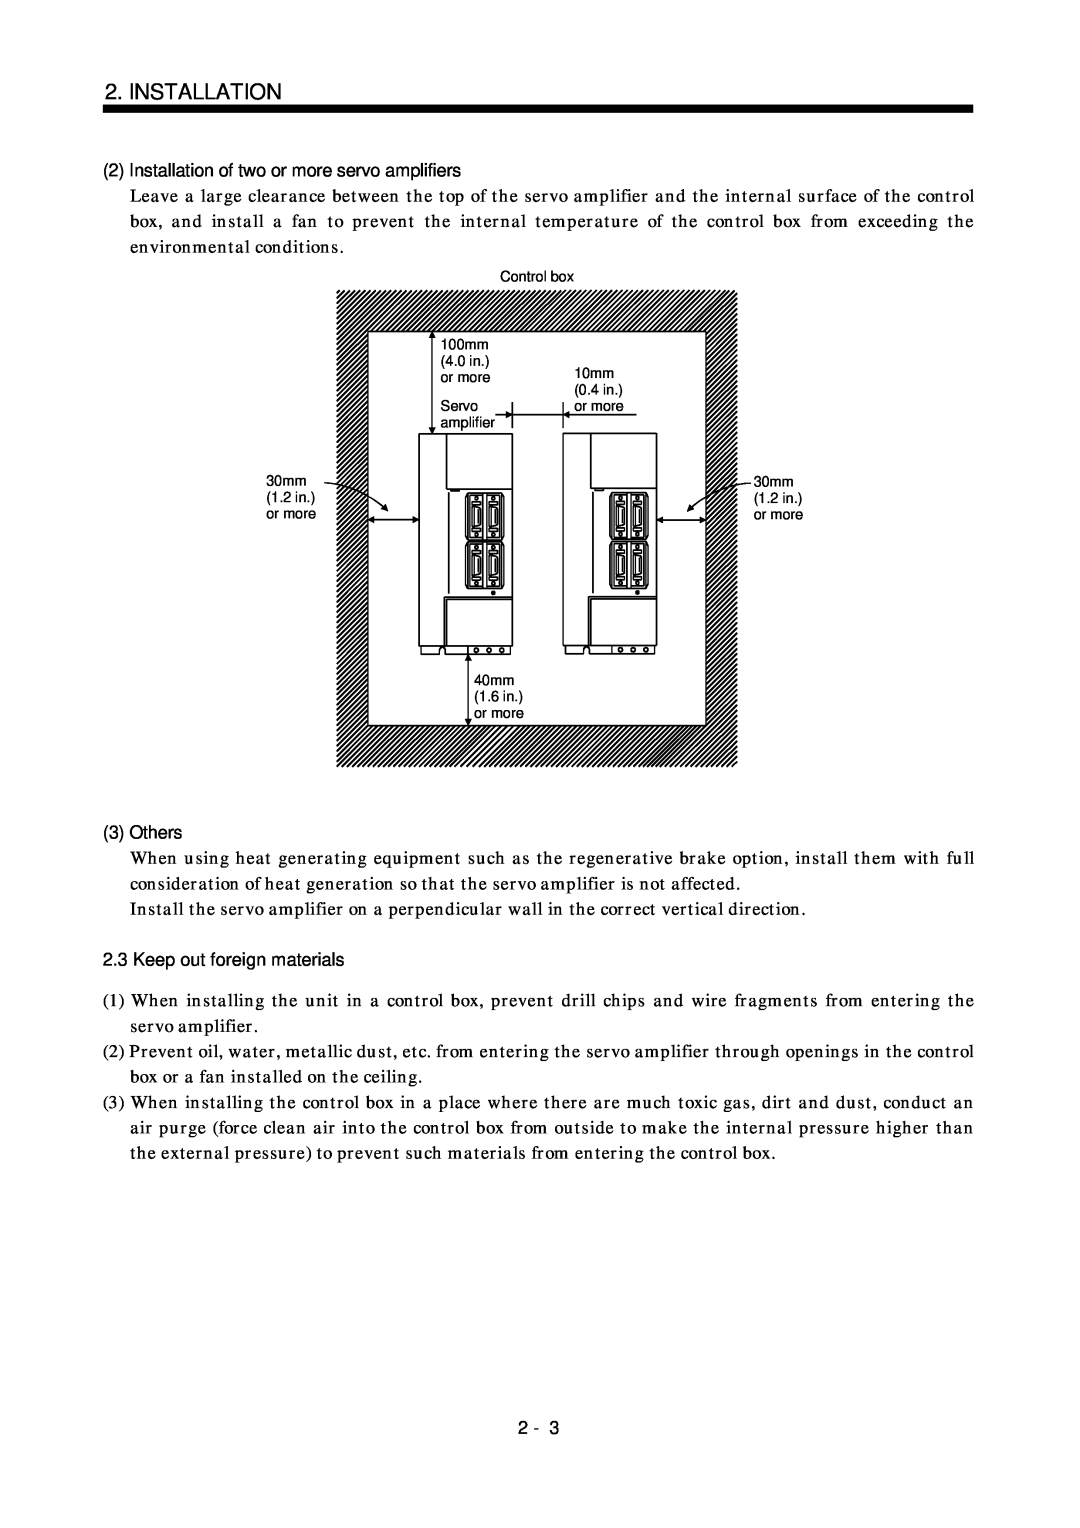 Bose MR-J2S- B instruction manual 2Installation of two or more servo amplifiers, 3Others, Keep out foreign materials 